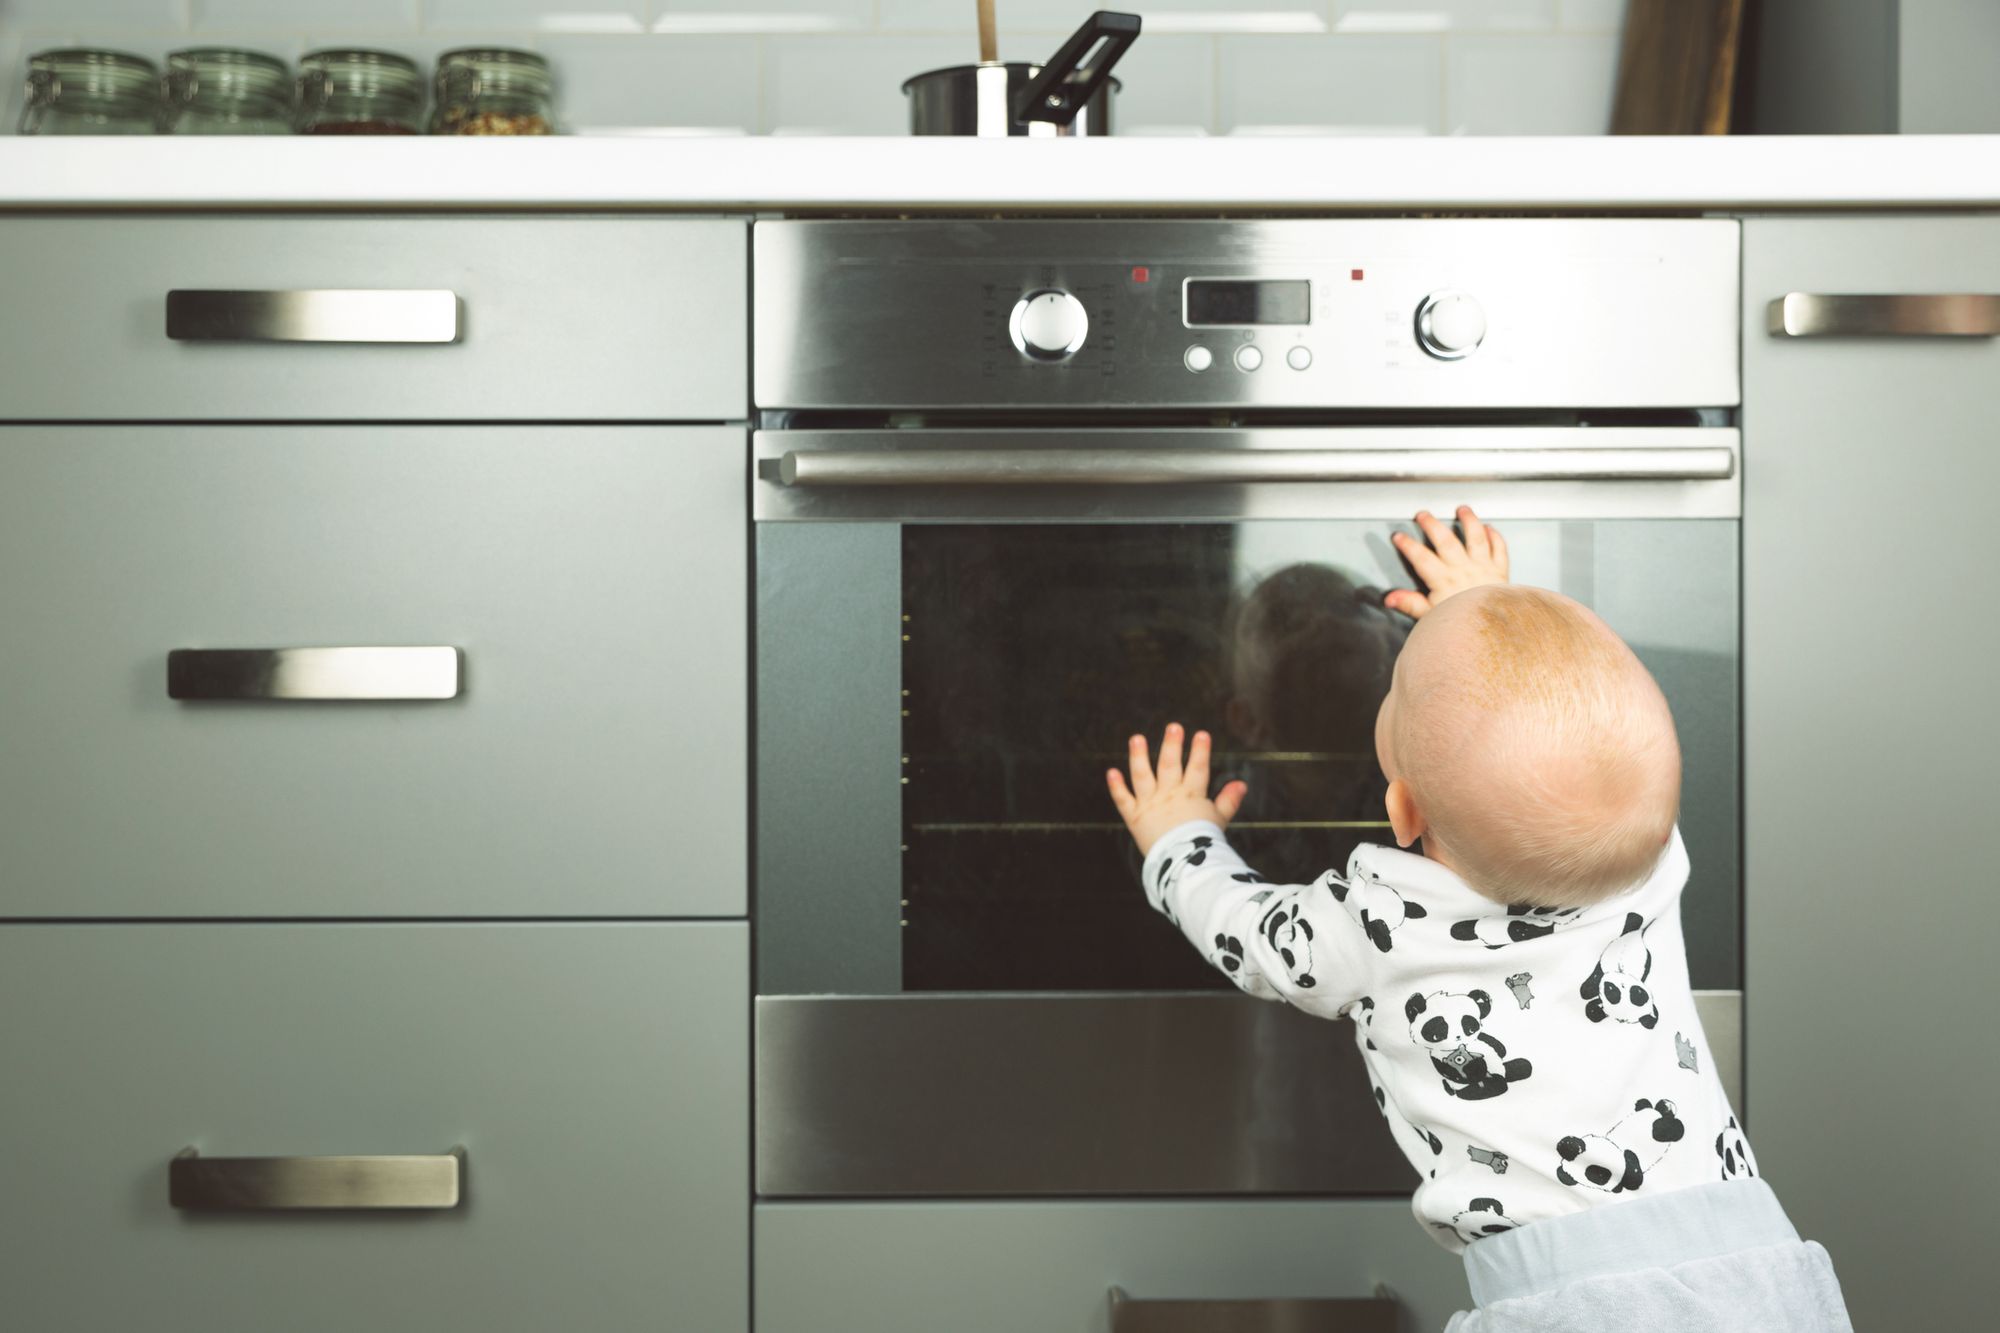 Child and Oven